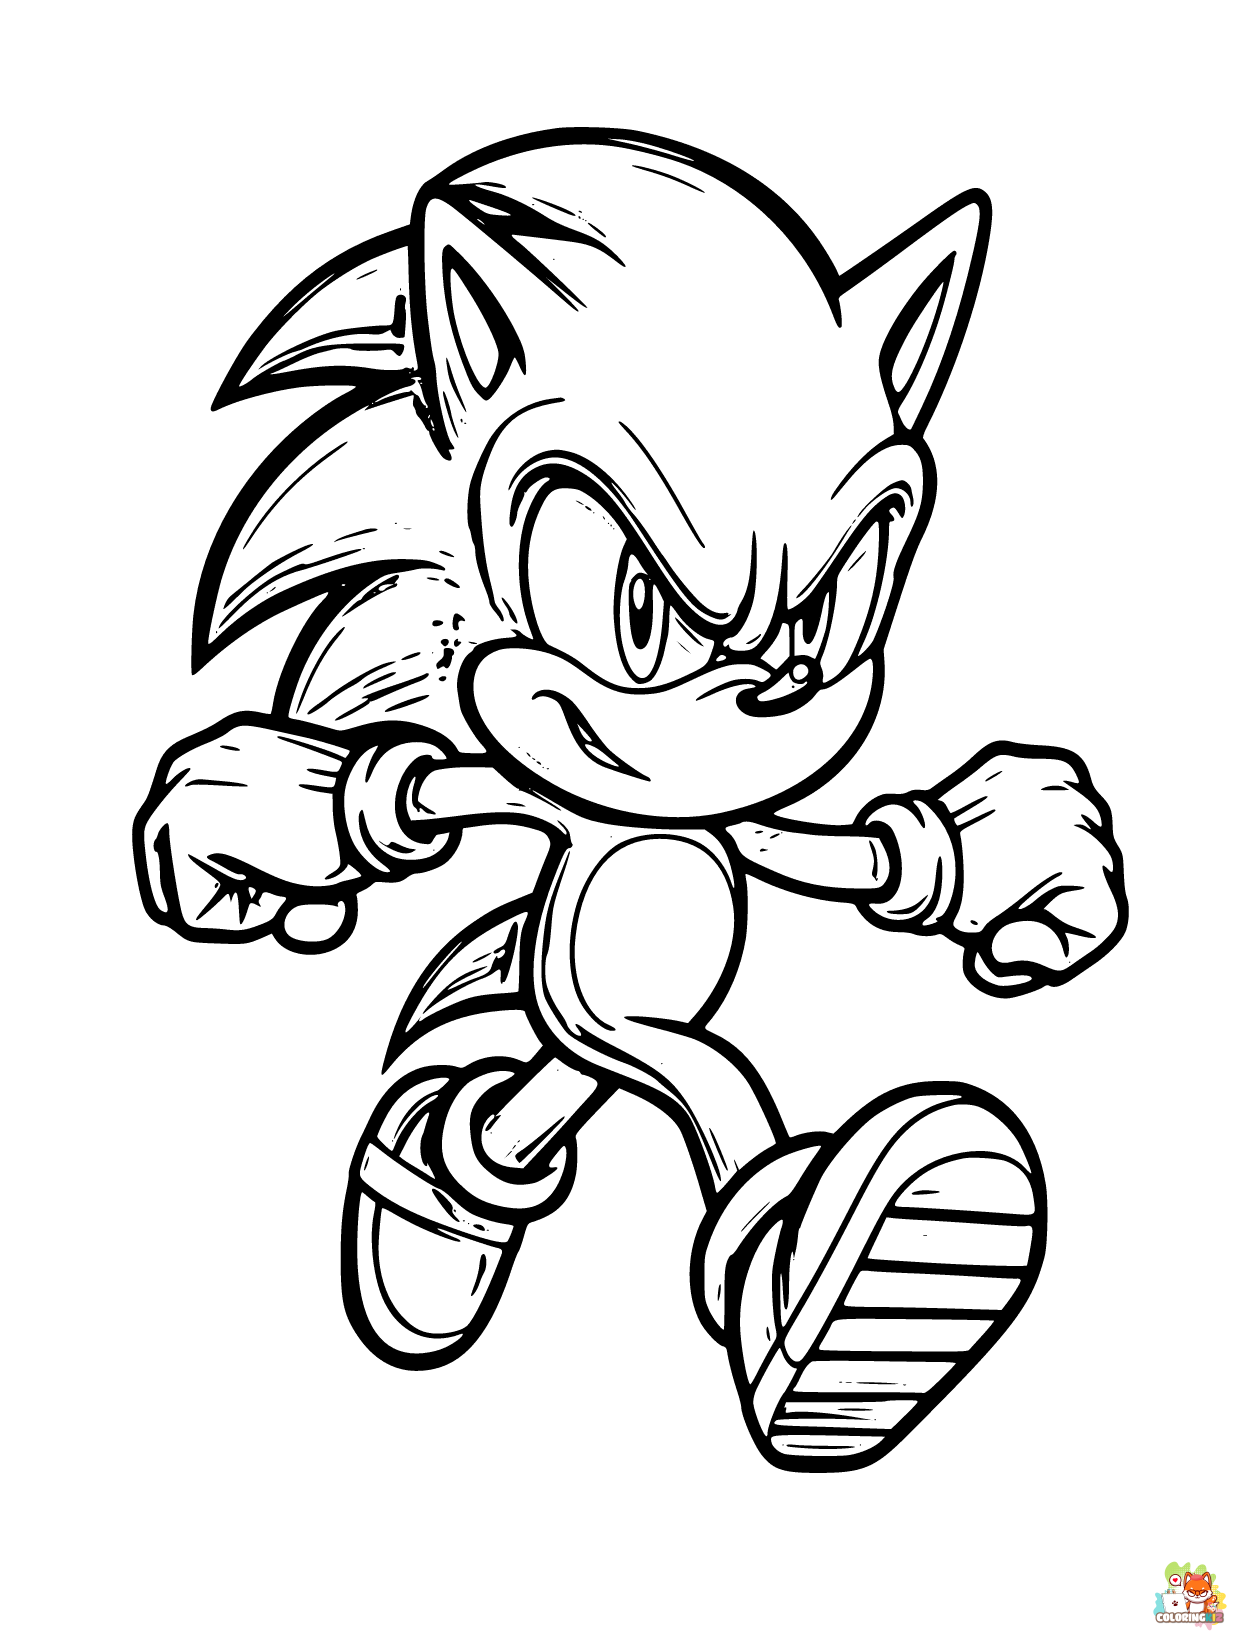 Sonic coloring pages for kids 3